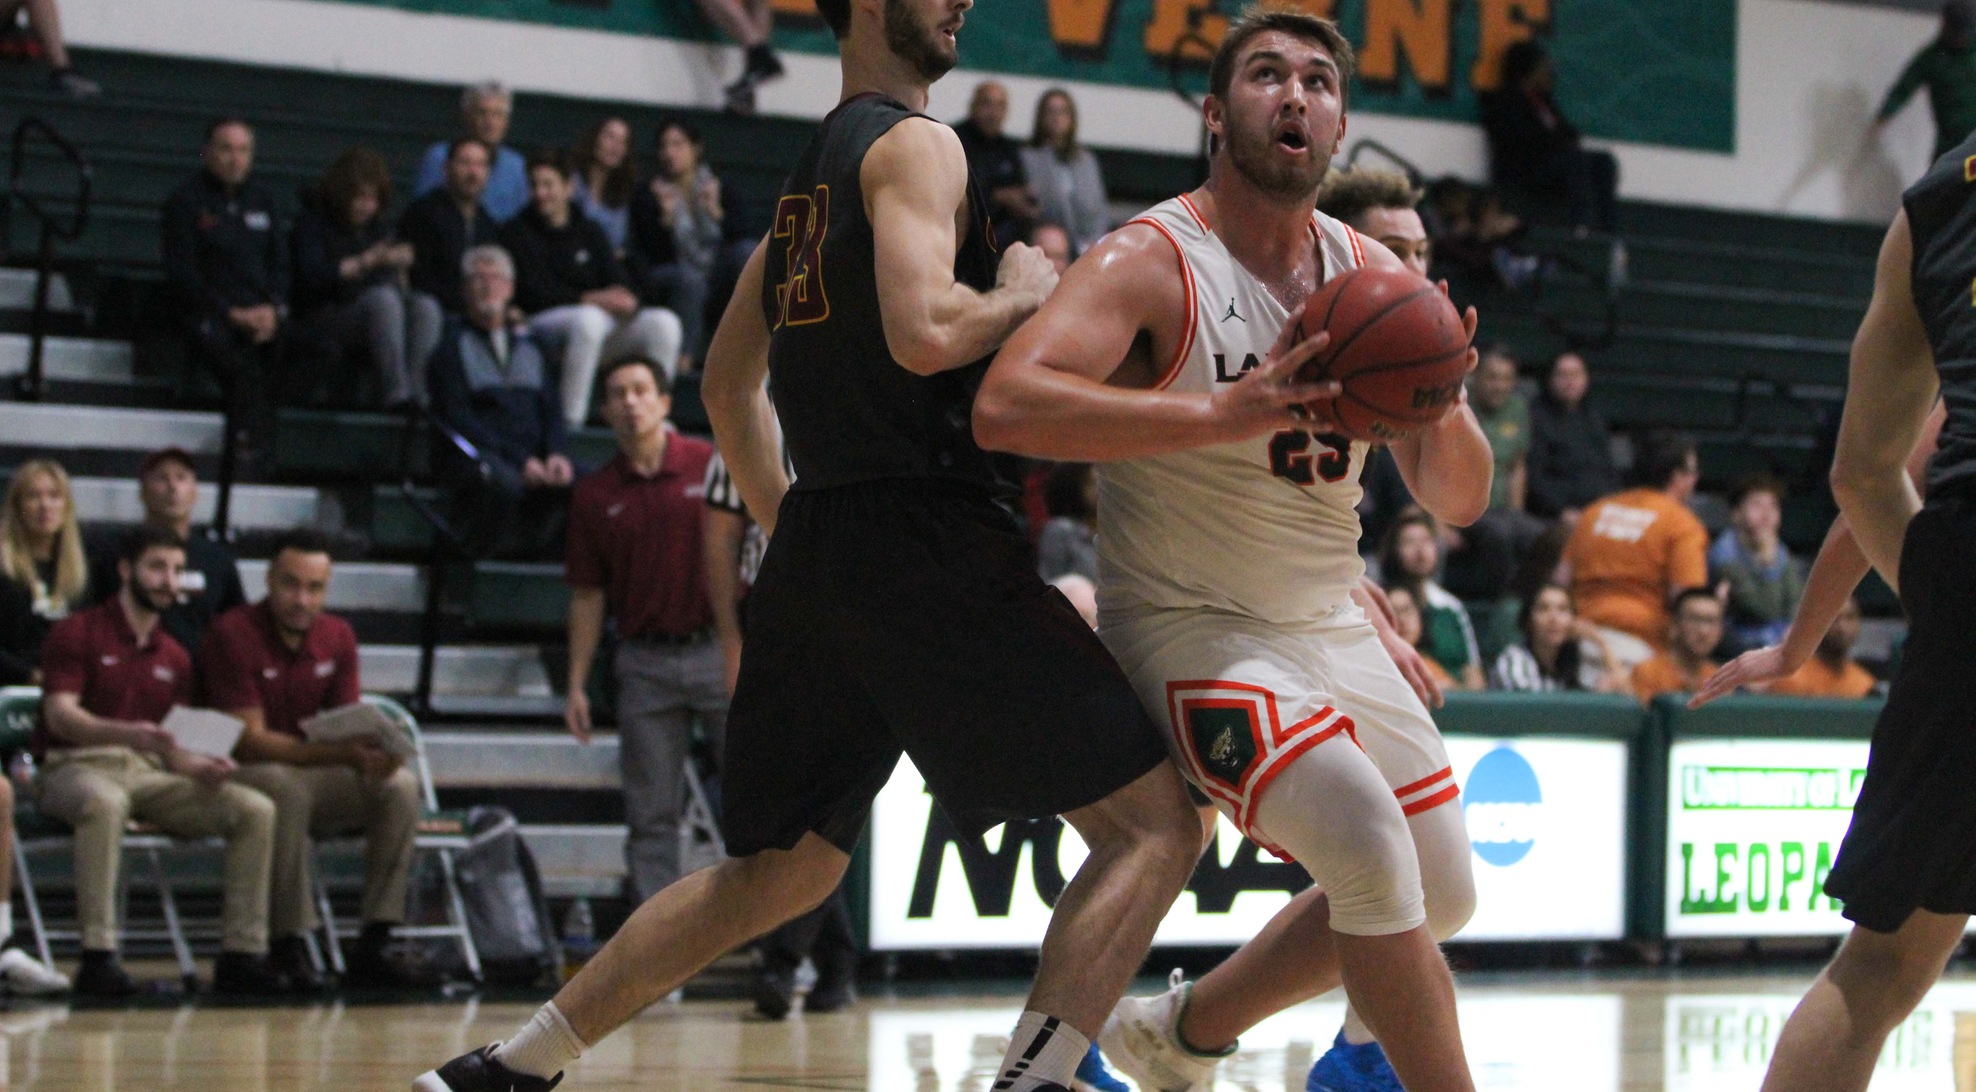 Men's Basketball falls to Linfield on the road